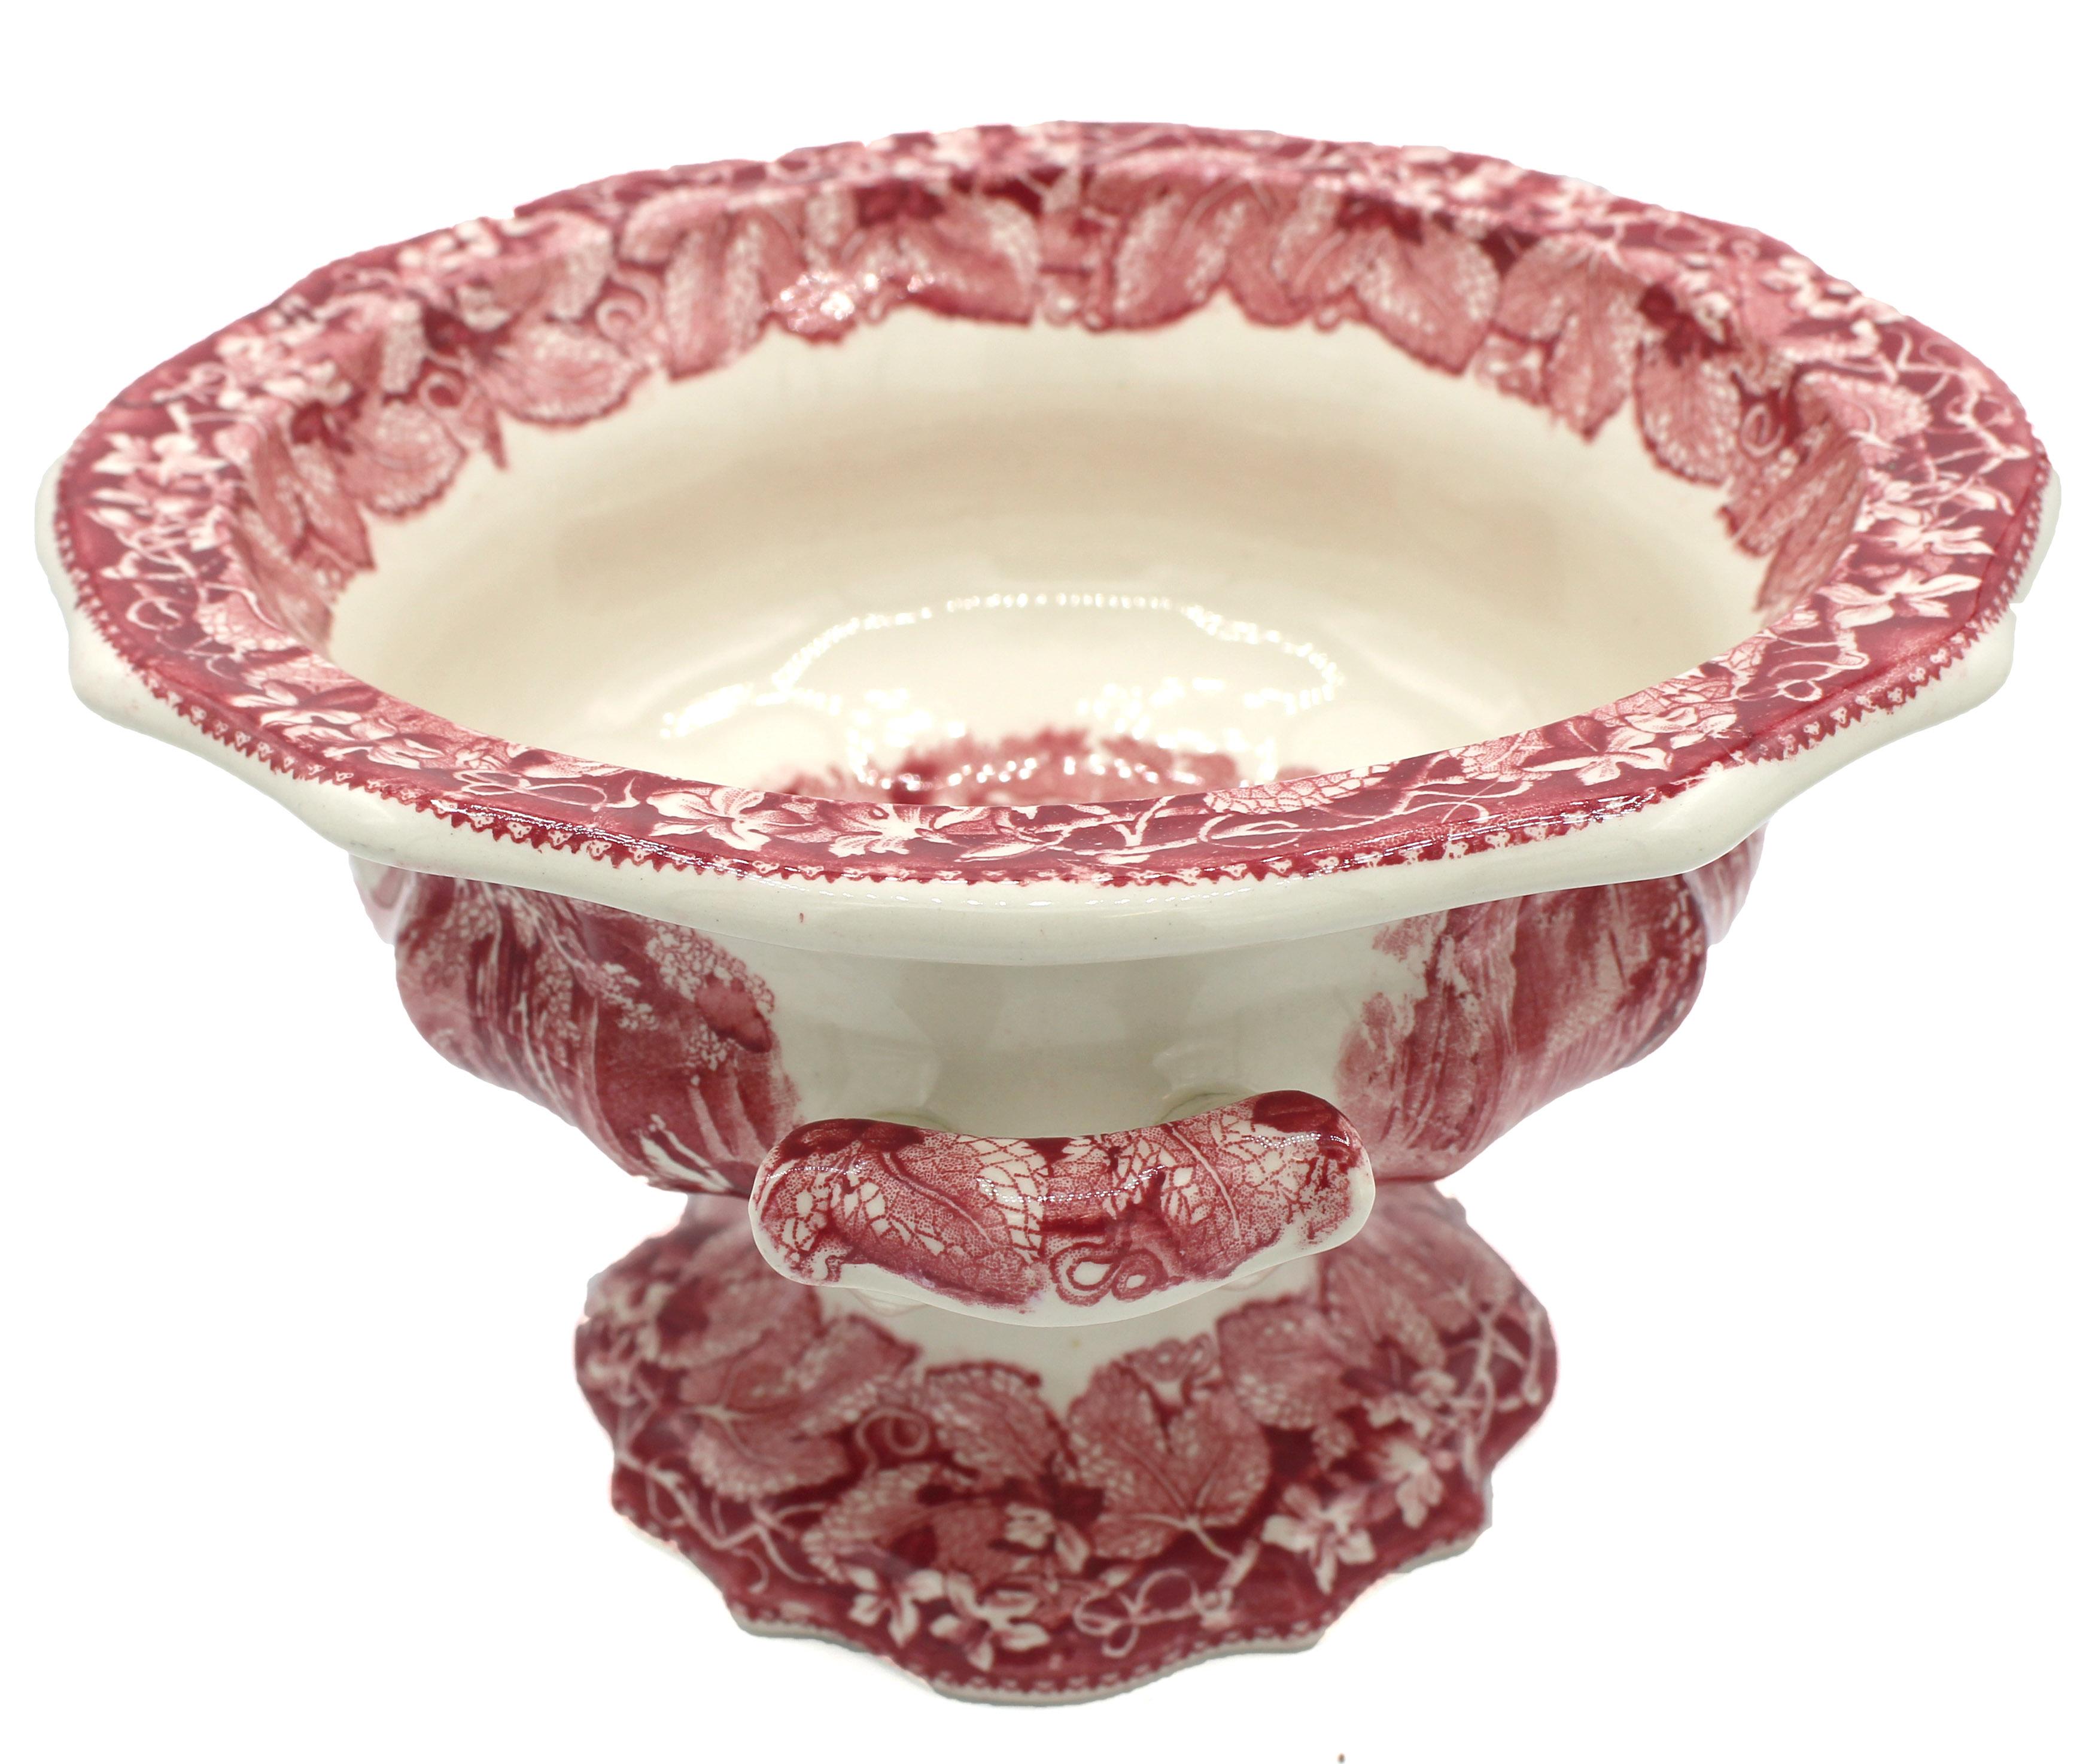 1891-1911 Mason's Vista pink salad bowl or fruit bowl, English. Compote or stemmed form with handles. Well done, crisp transfer print decoration. Marked.
10.75